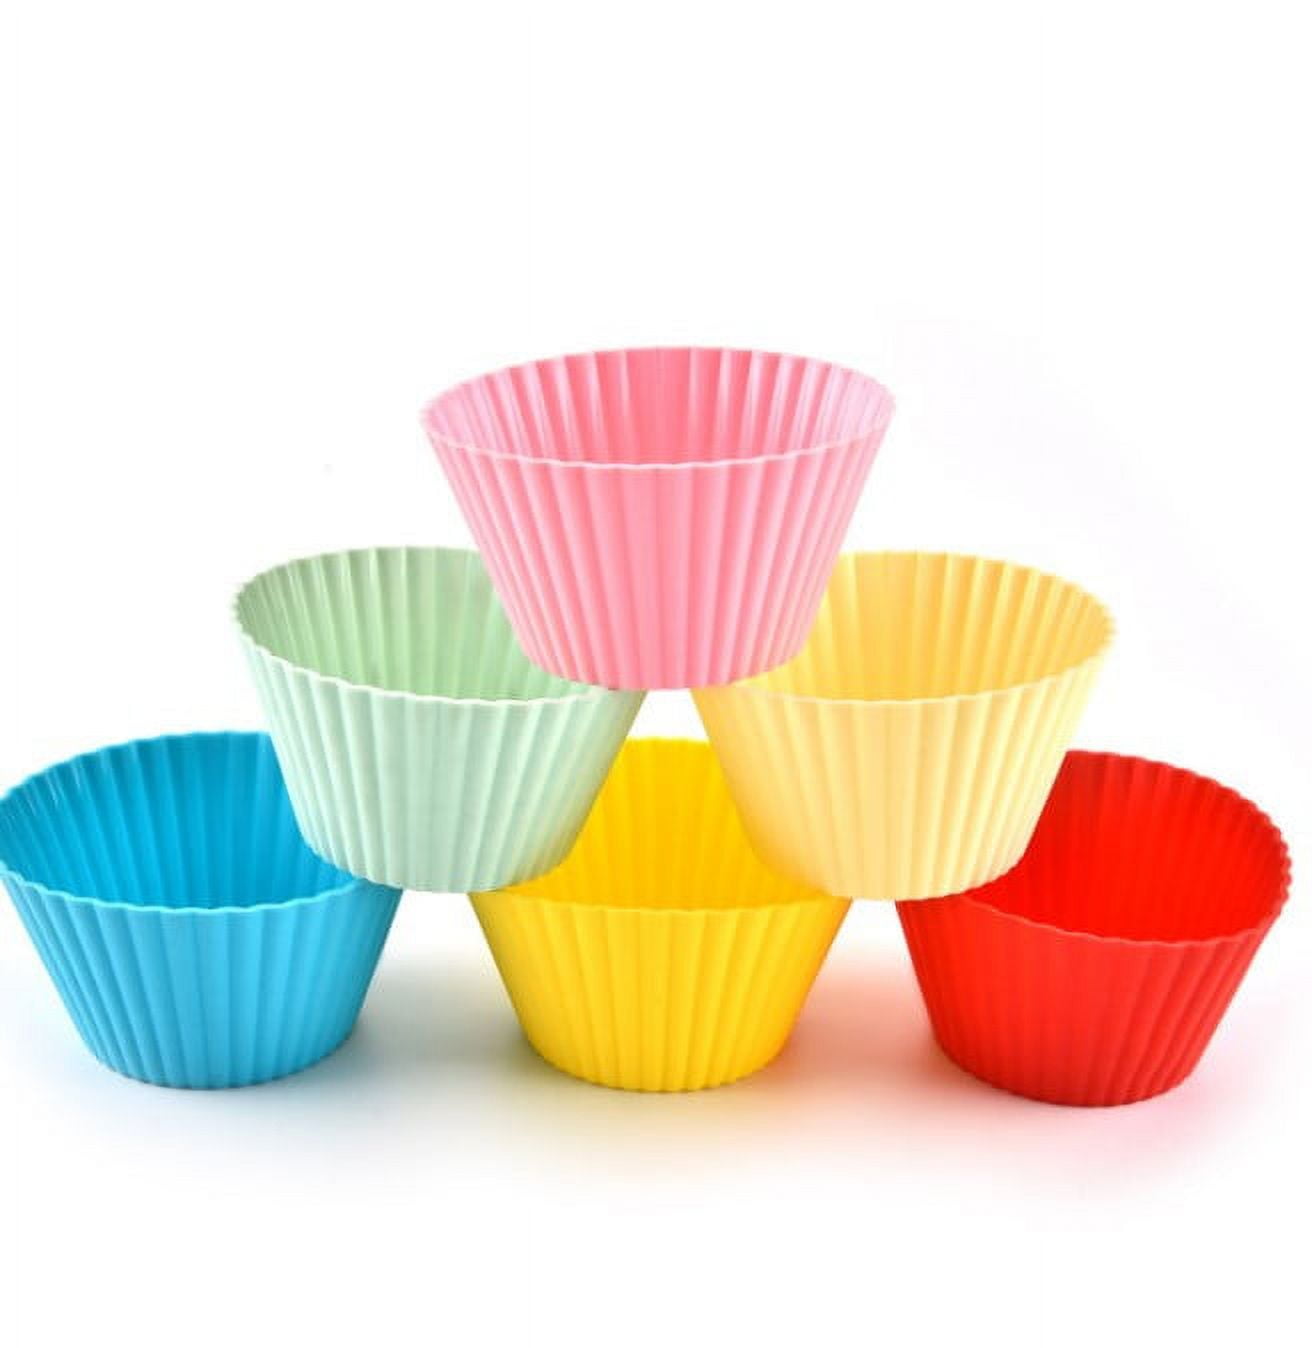 Silicone Baking Cheesecake Bites  Silicone Muffin Cups Large - 6 Cup Silicone  Muffin - Aliexpress